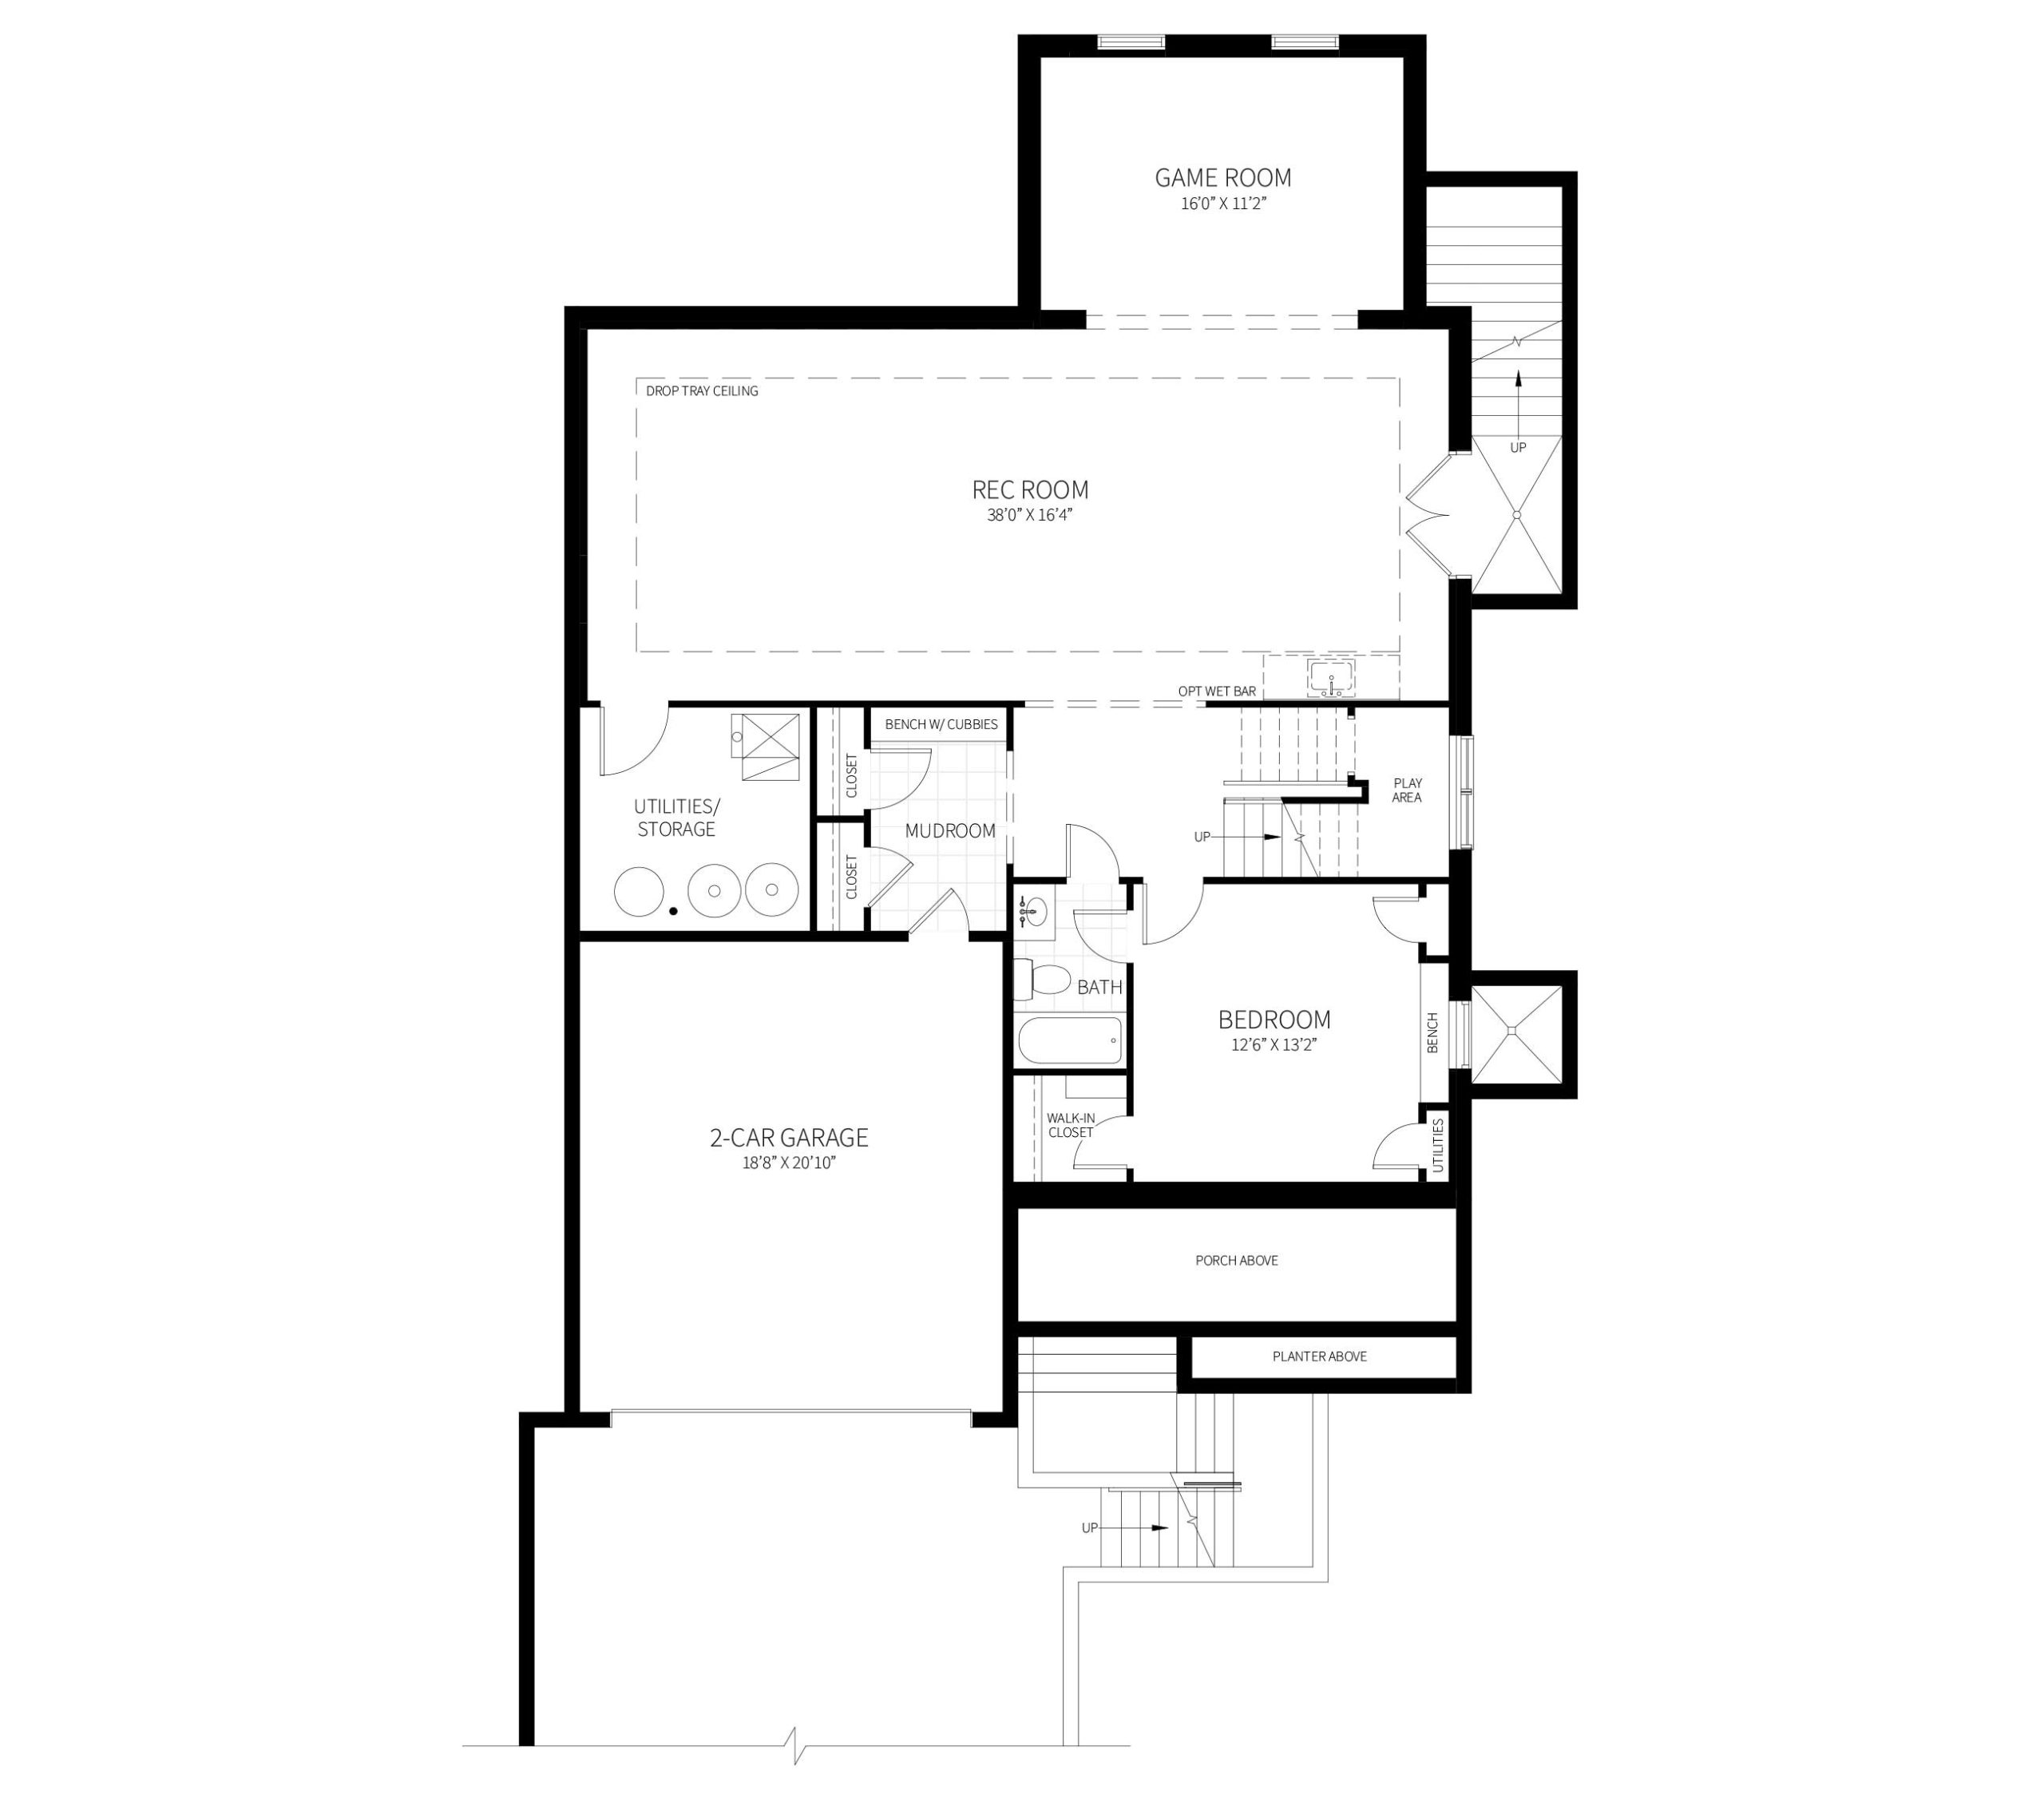 The basement/garage level floor plan of the proposed home, showing a mudroom, bedroom and rec room.